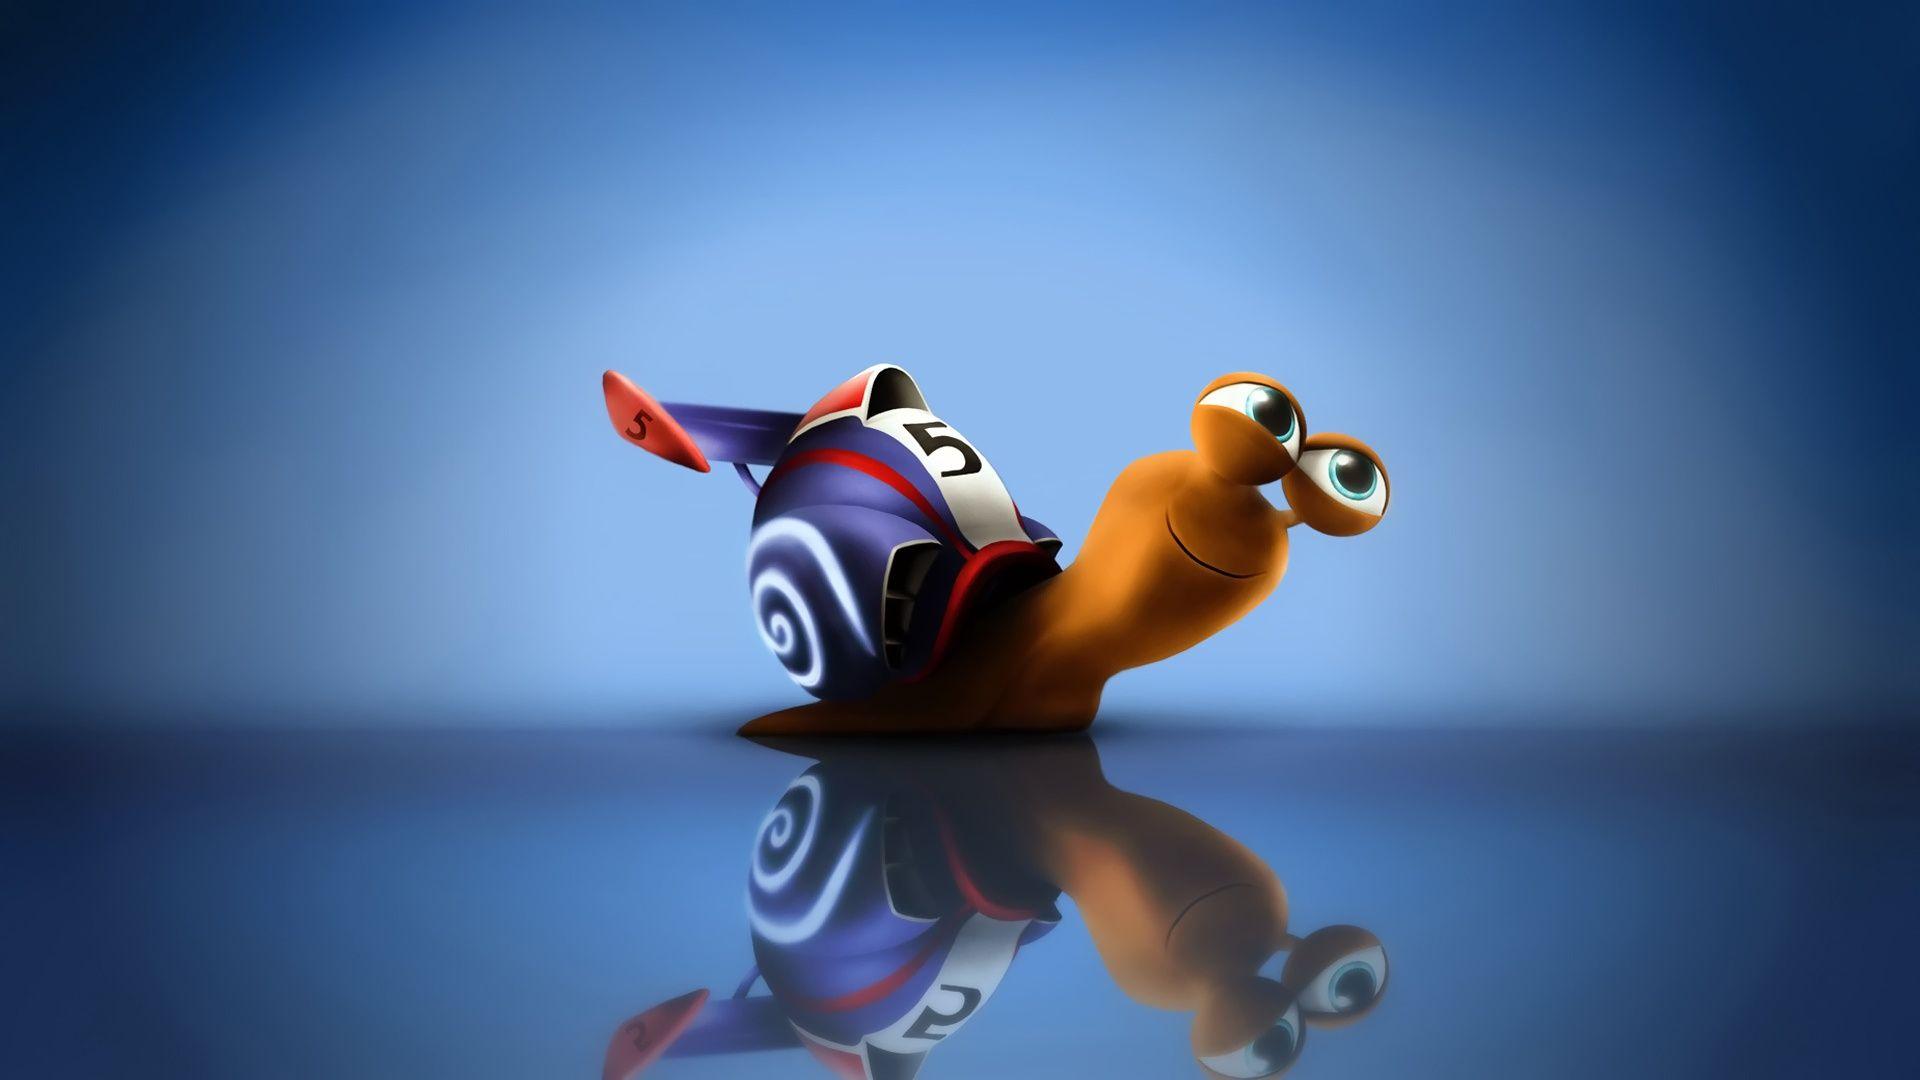 Turbo 3D Animated Movie Image Wallpaper HD Des Wallpaper